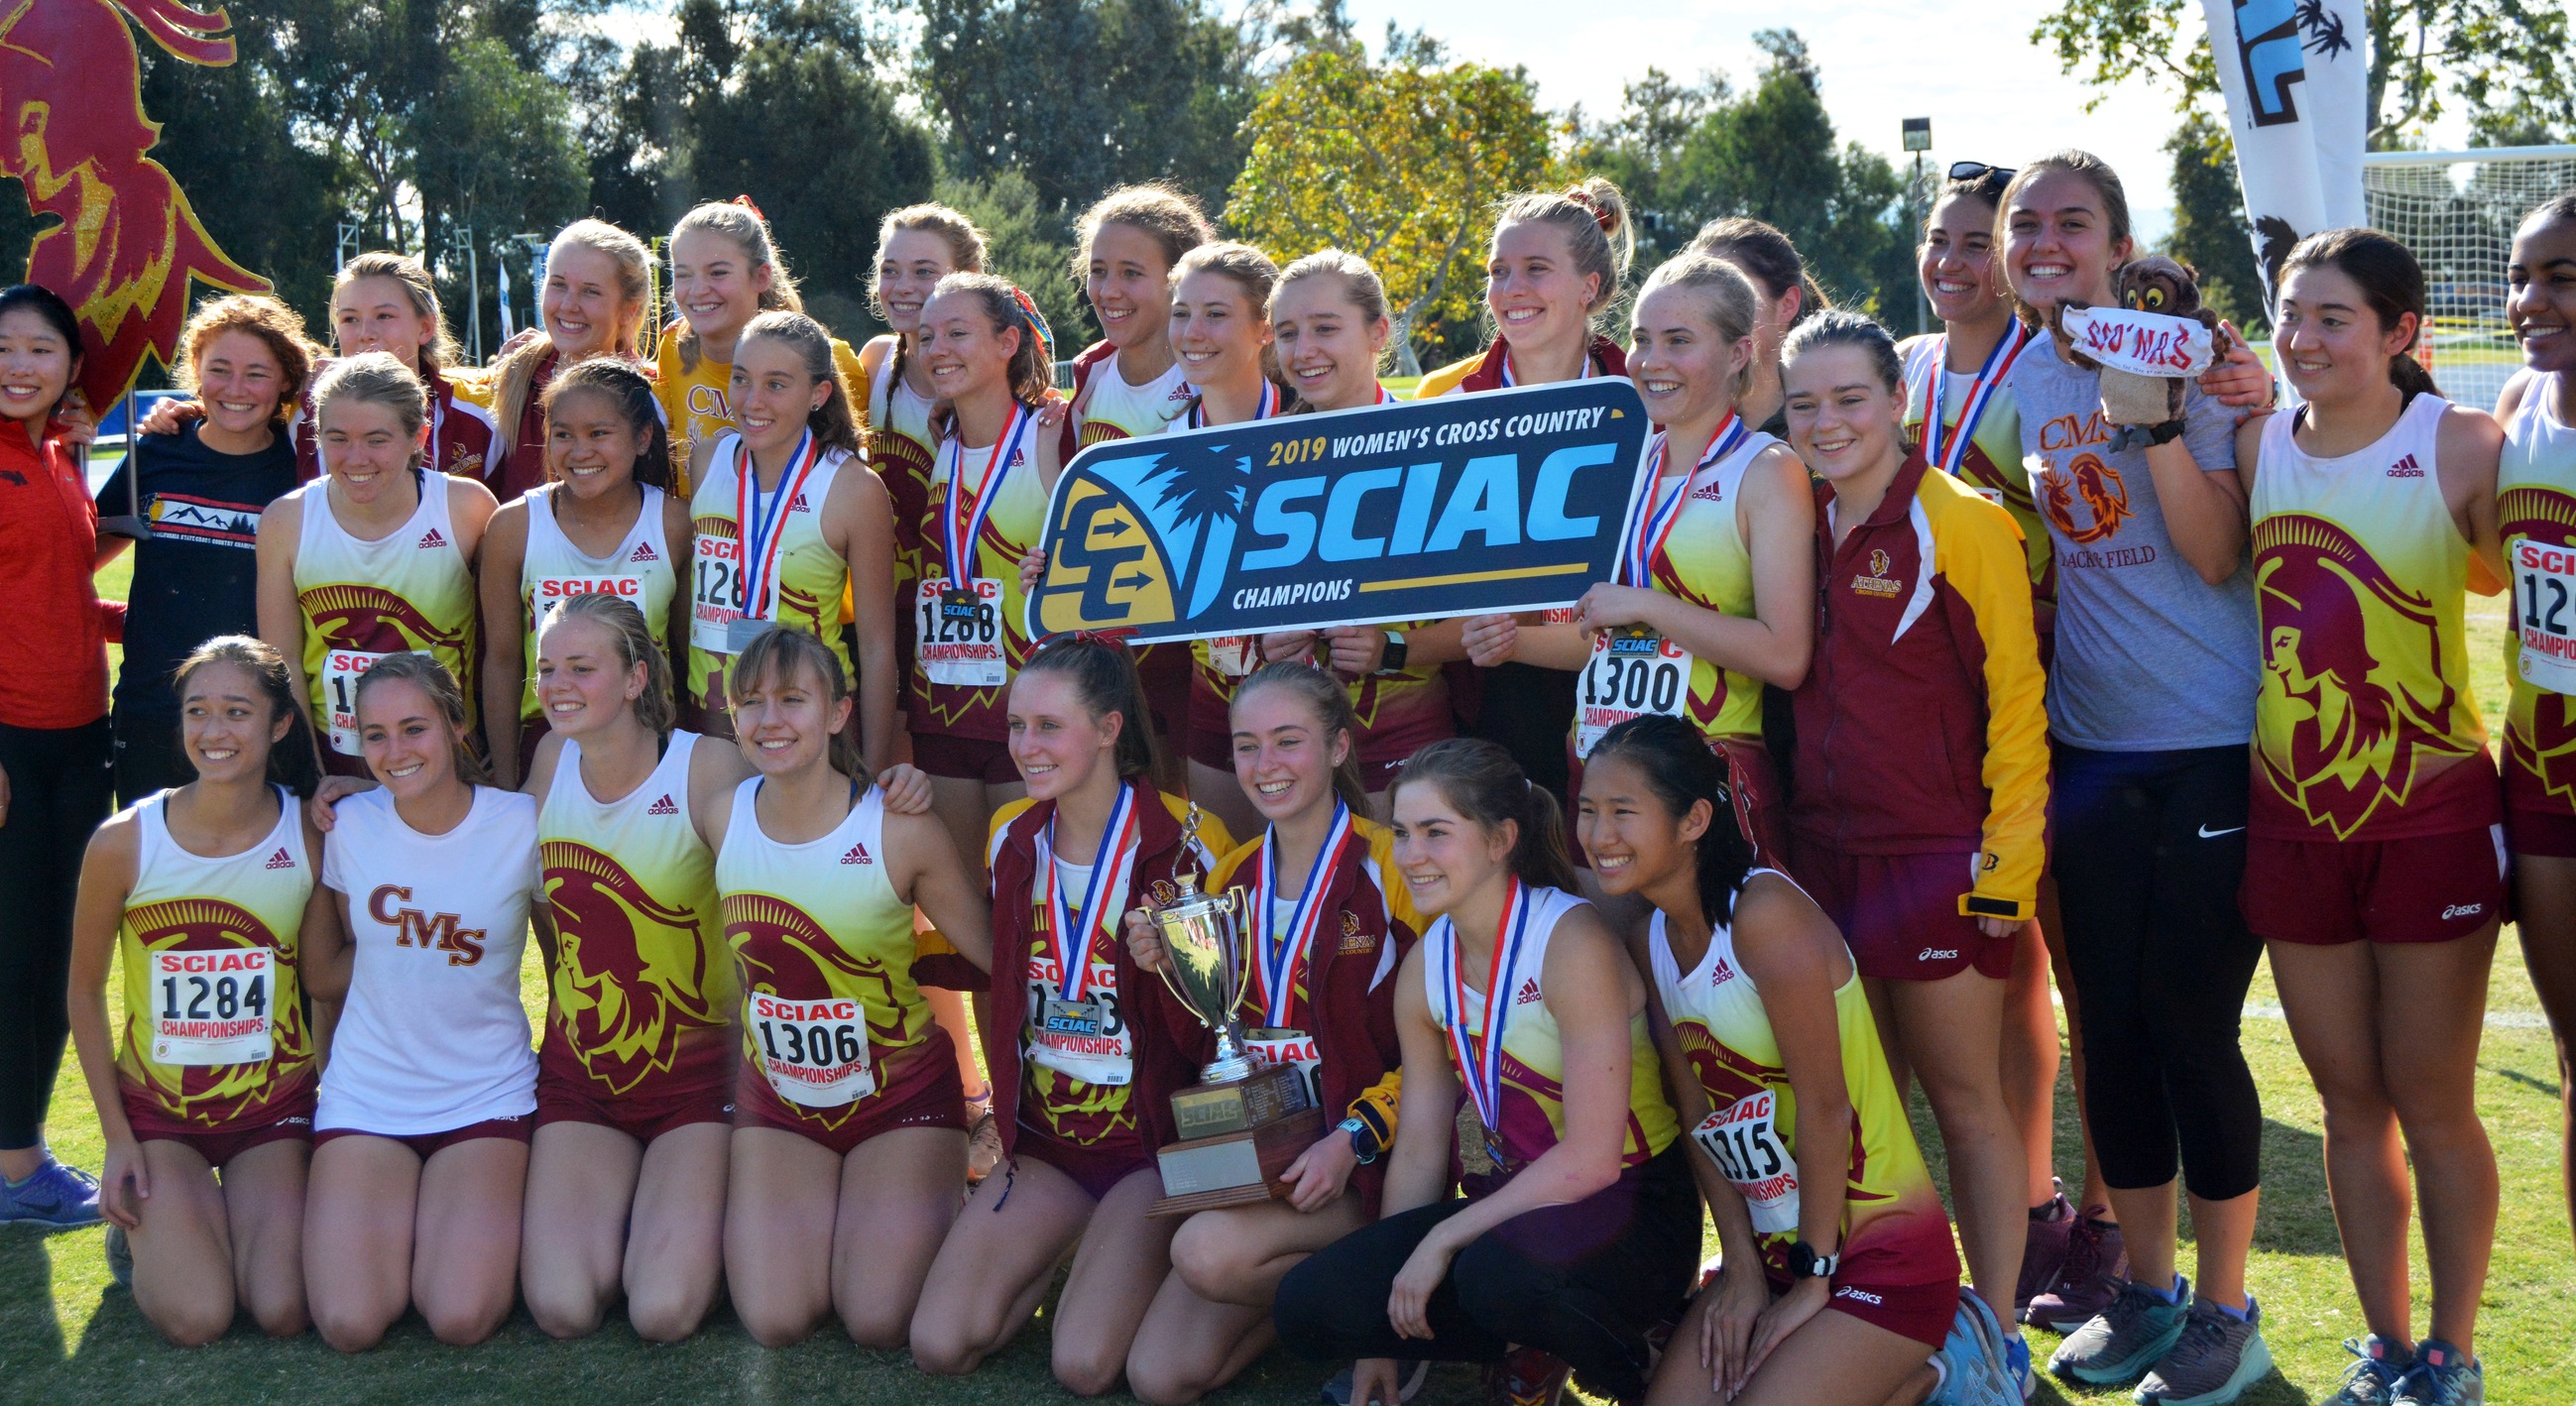 The 2019 women's cross country team celebrates the SCIAC title